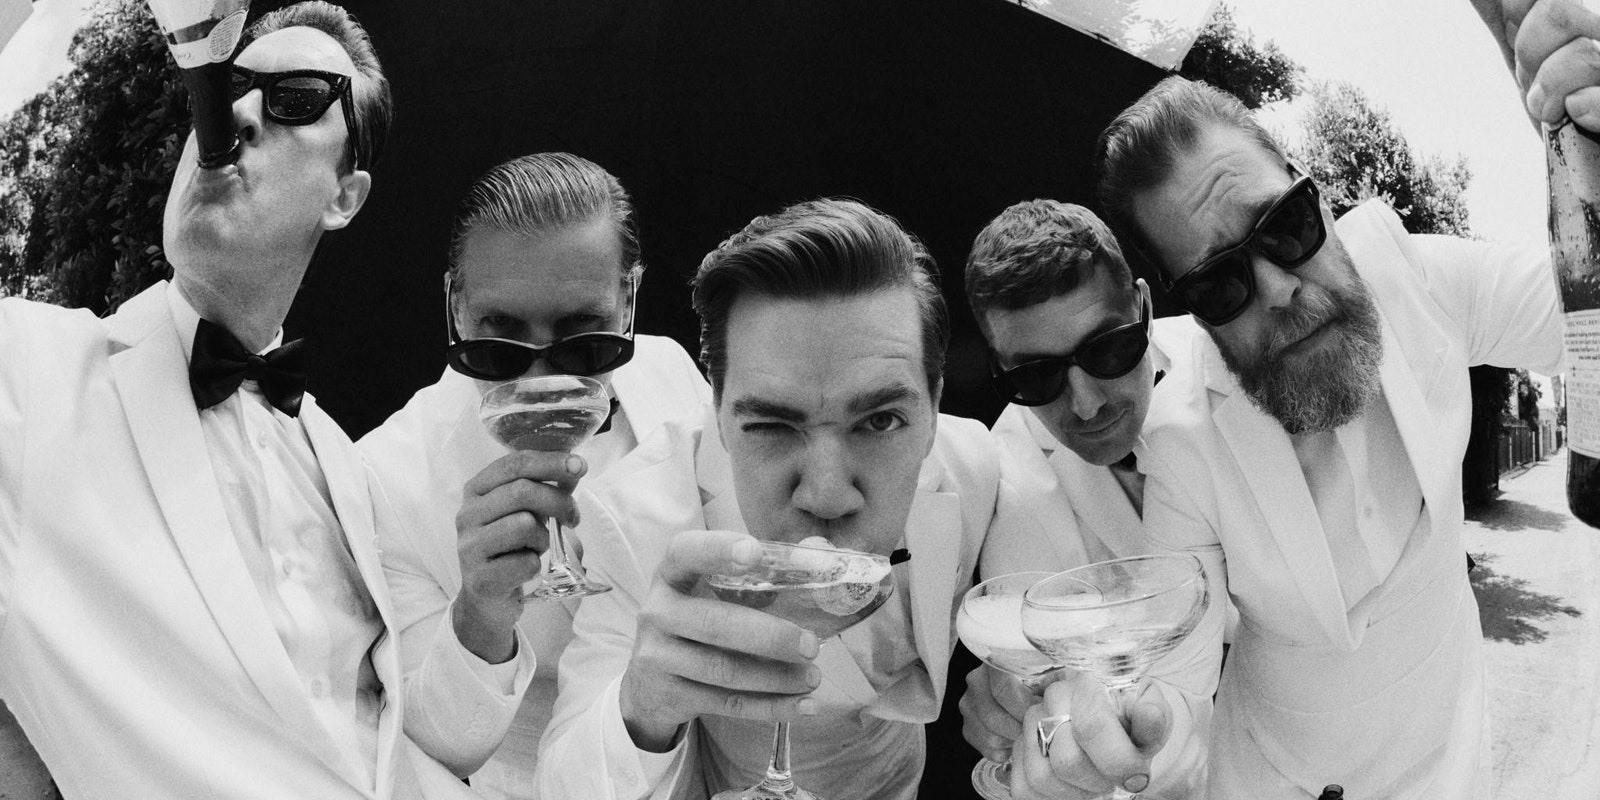 The Hives Issue Call for Cover Bands, Say They’re Franchising Live Shows